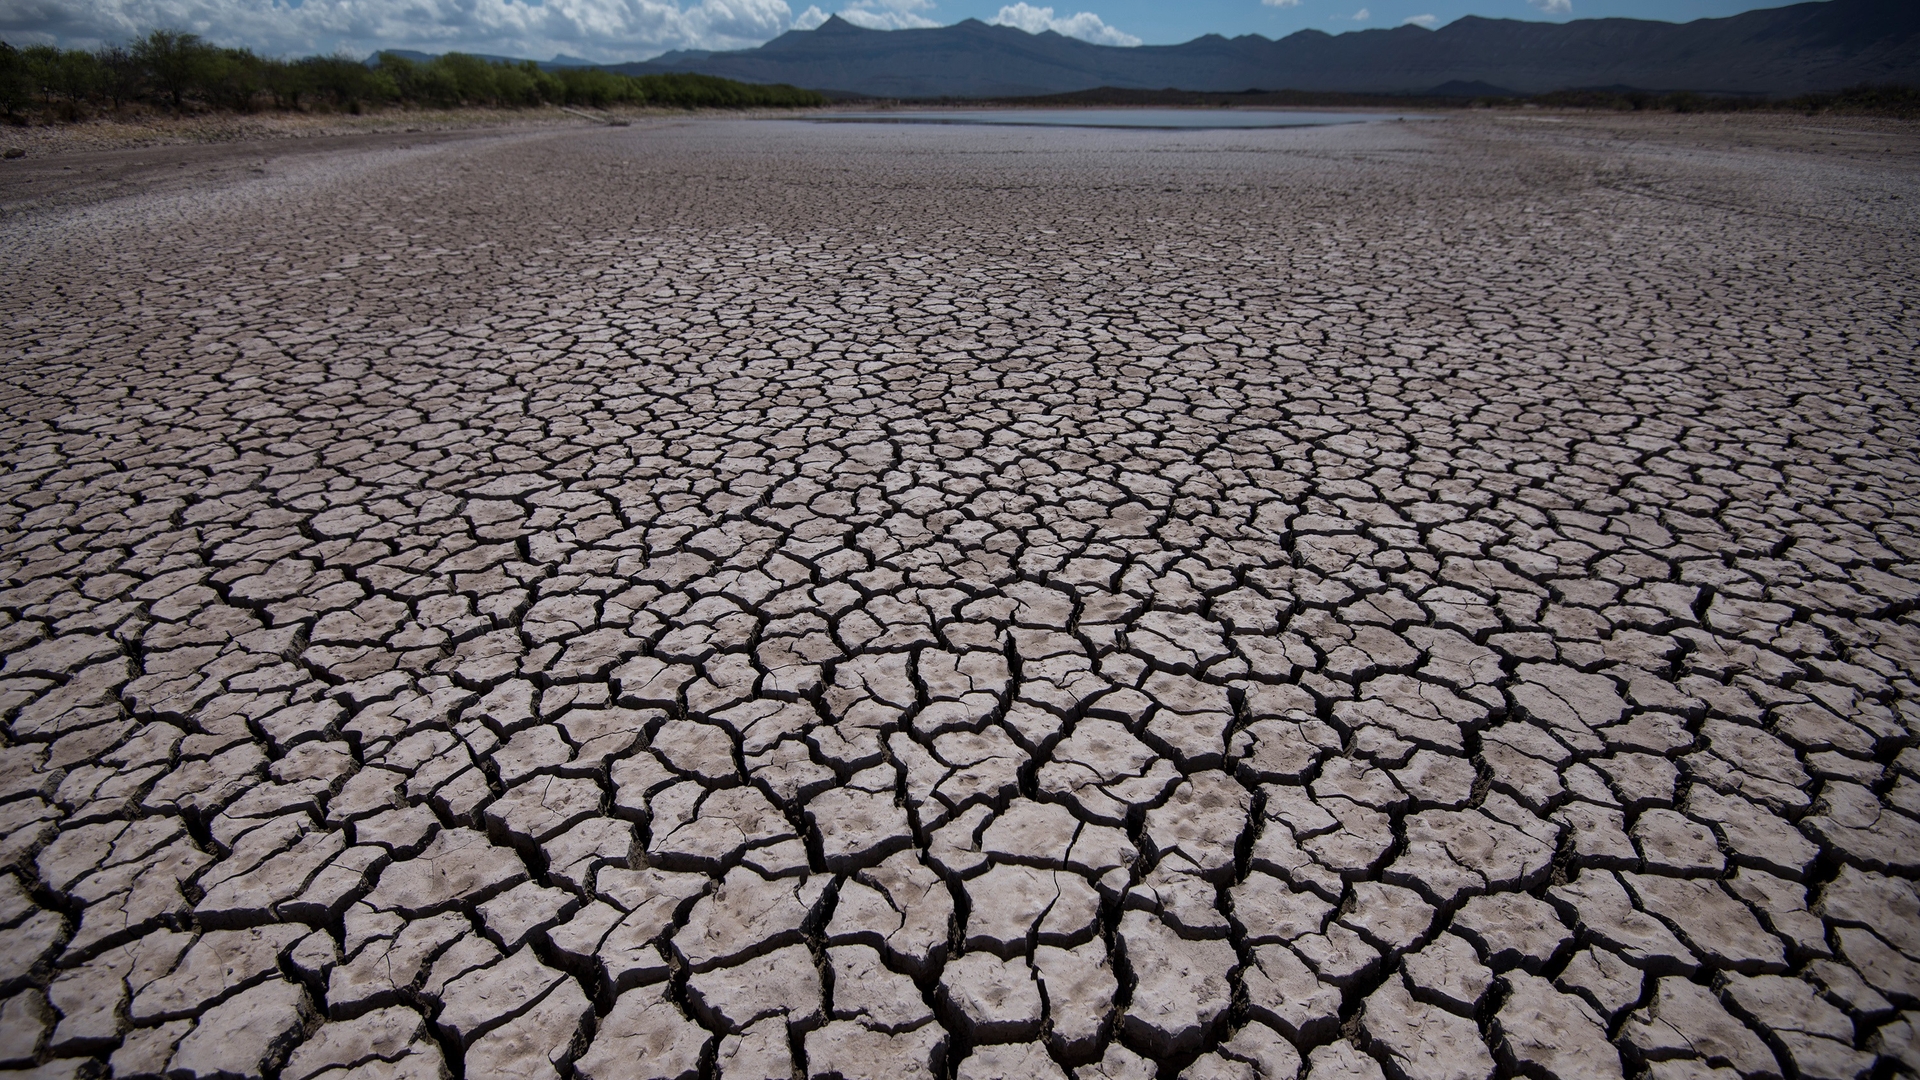 The drought in Mexico is due to the Hadley cell phenomenon